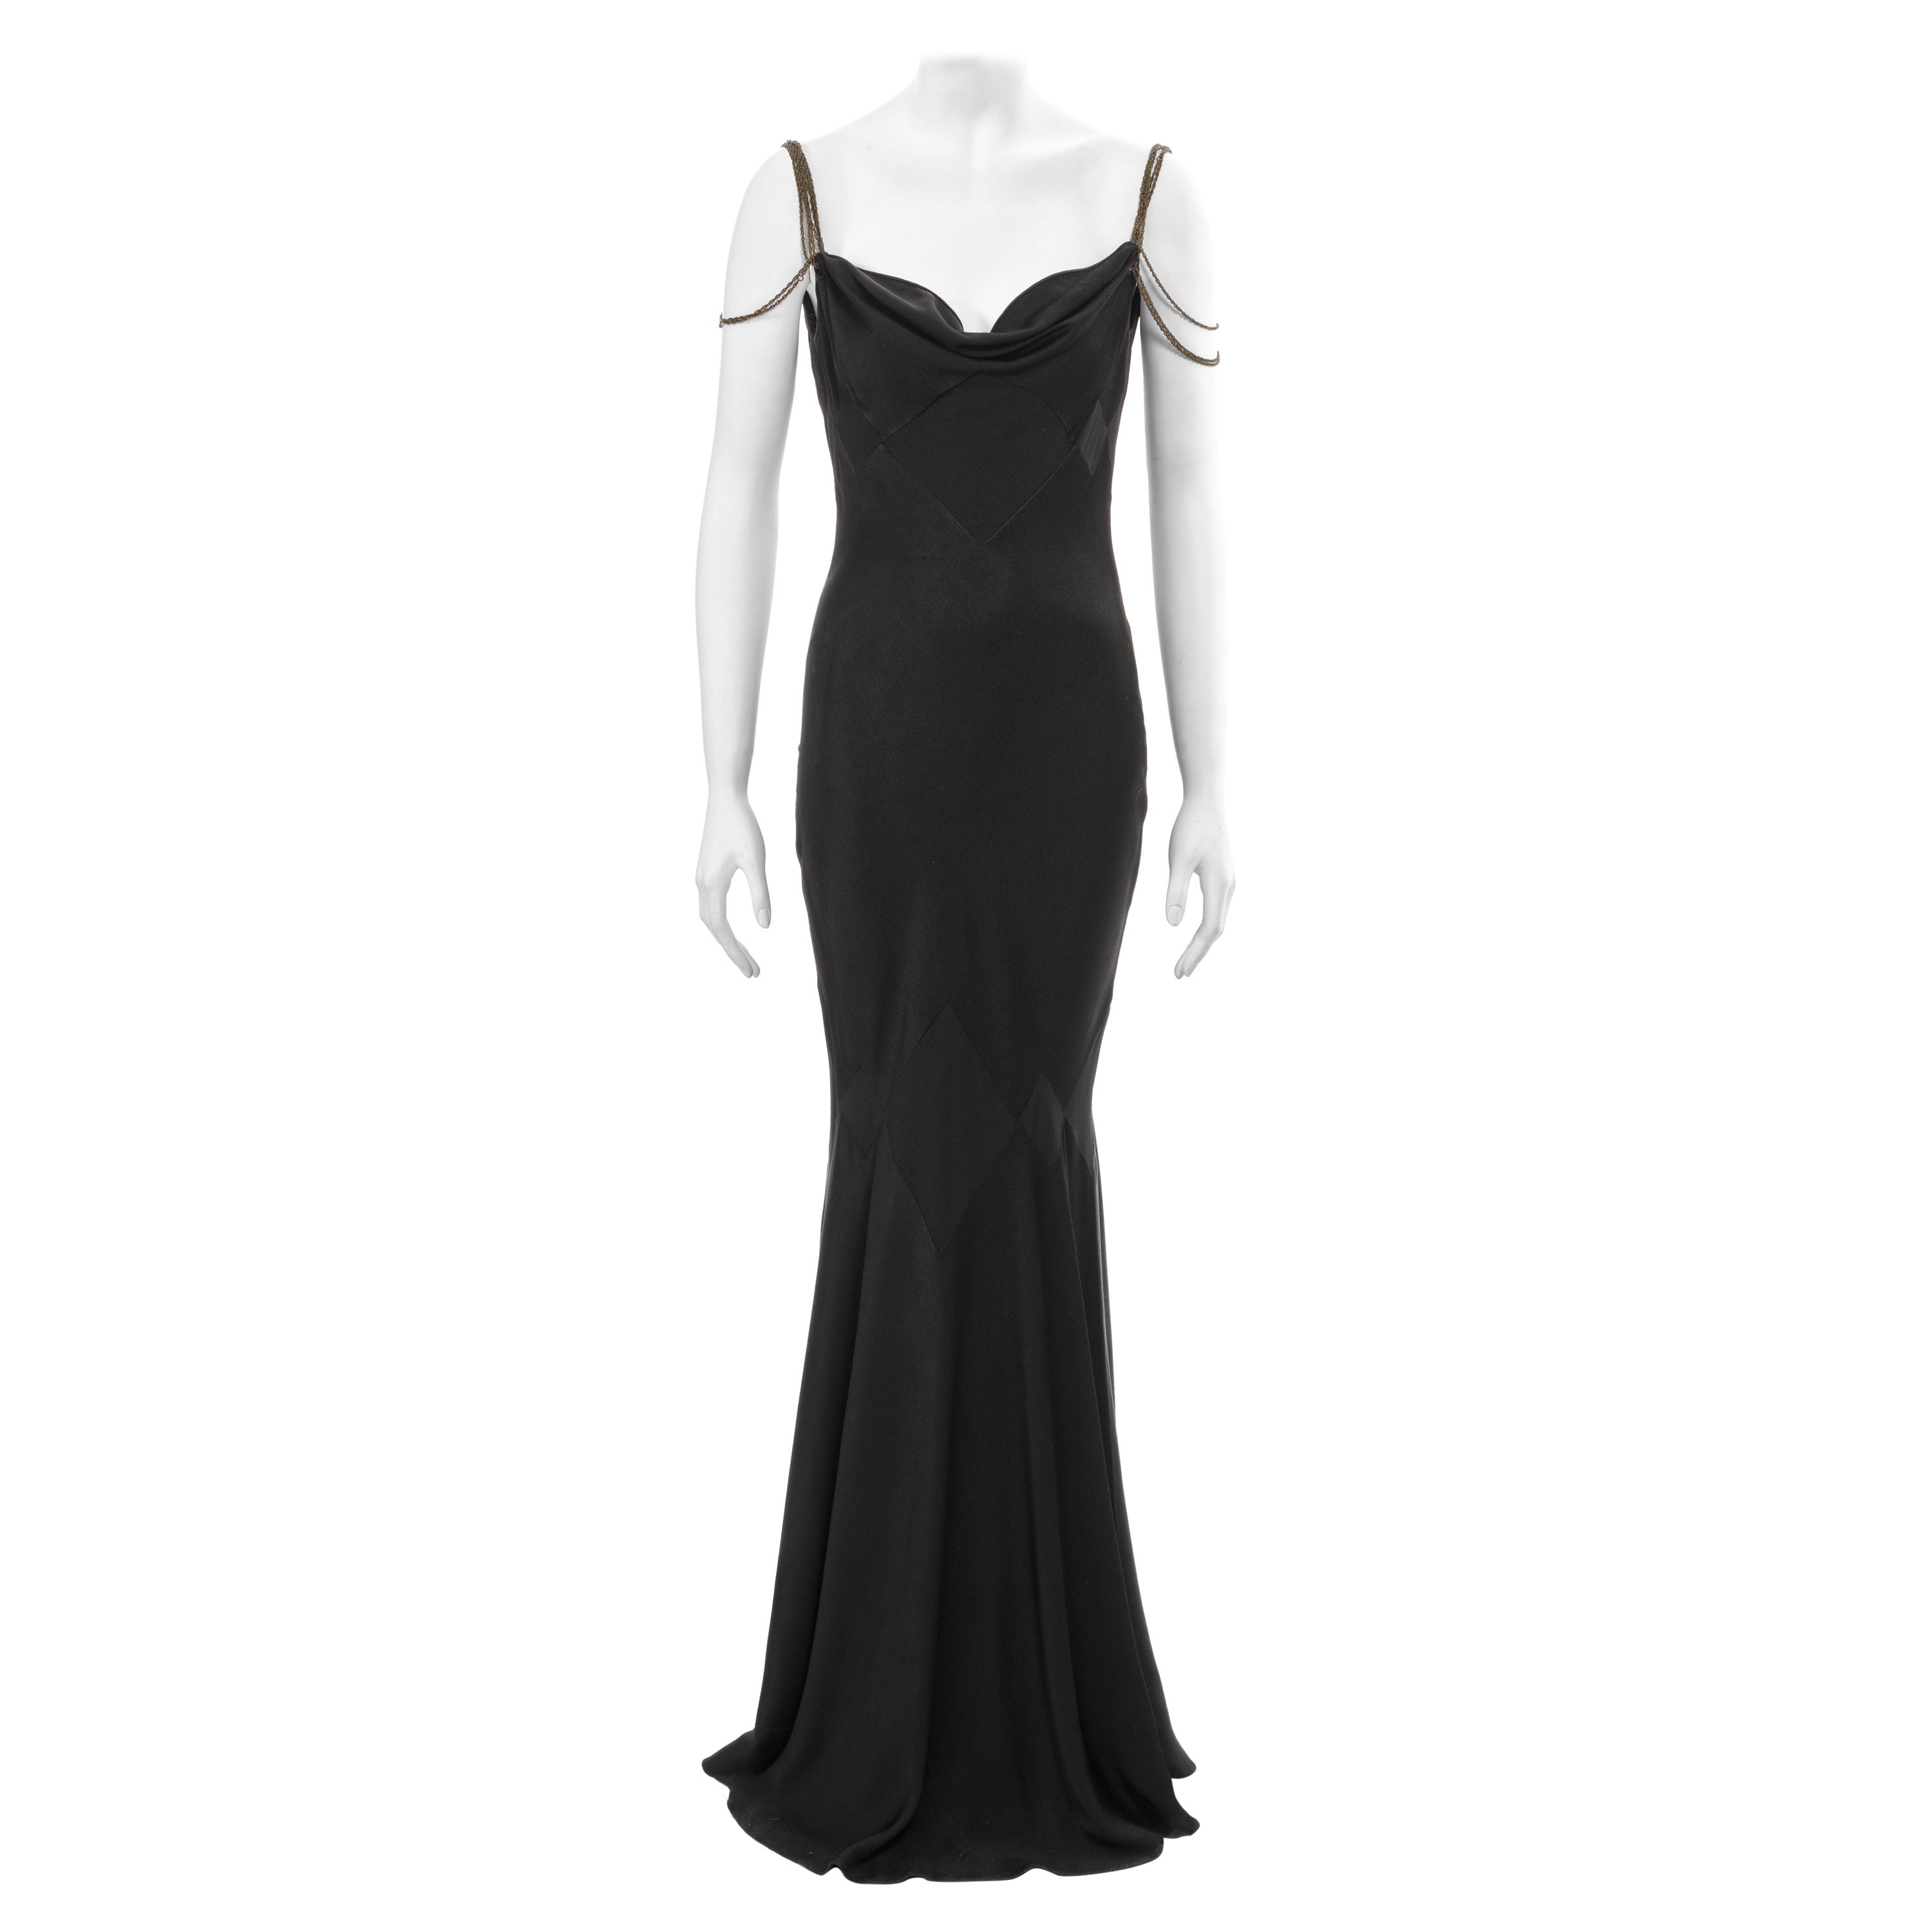 John Galliano black bias-cut satin evening dress with chain straps, ss 2002 For Sale